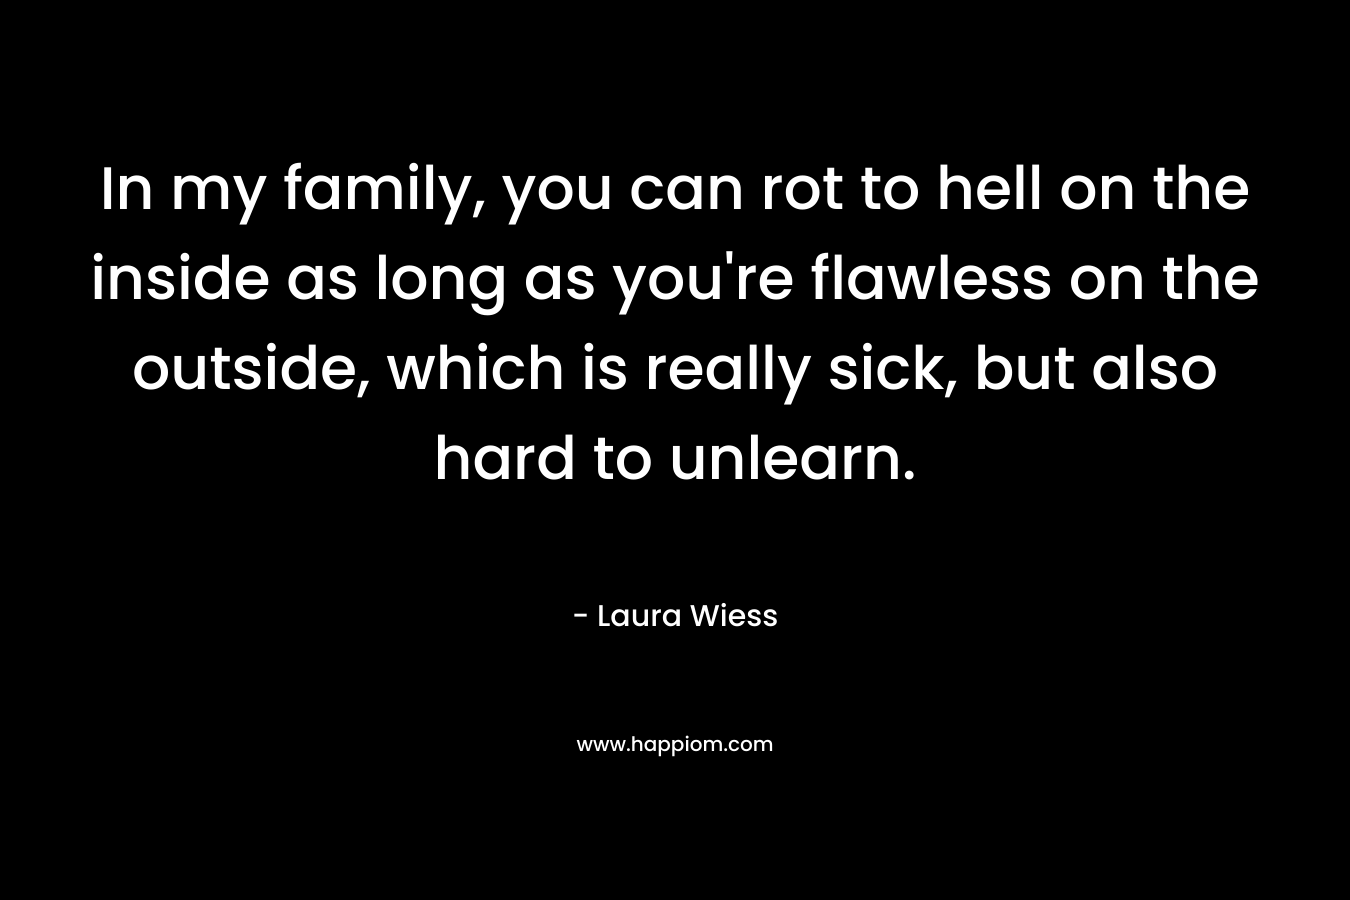 In my family, you can rot to hell on the inside as long as you’re flawless on the outside, which is really sick, but also hard to unlearn. – Laura Wiess